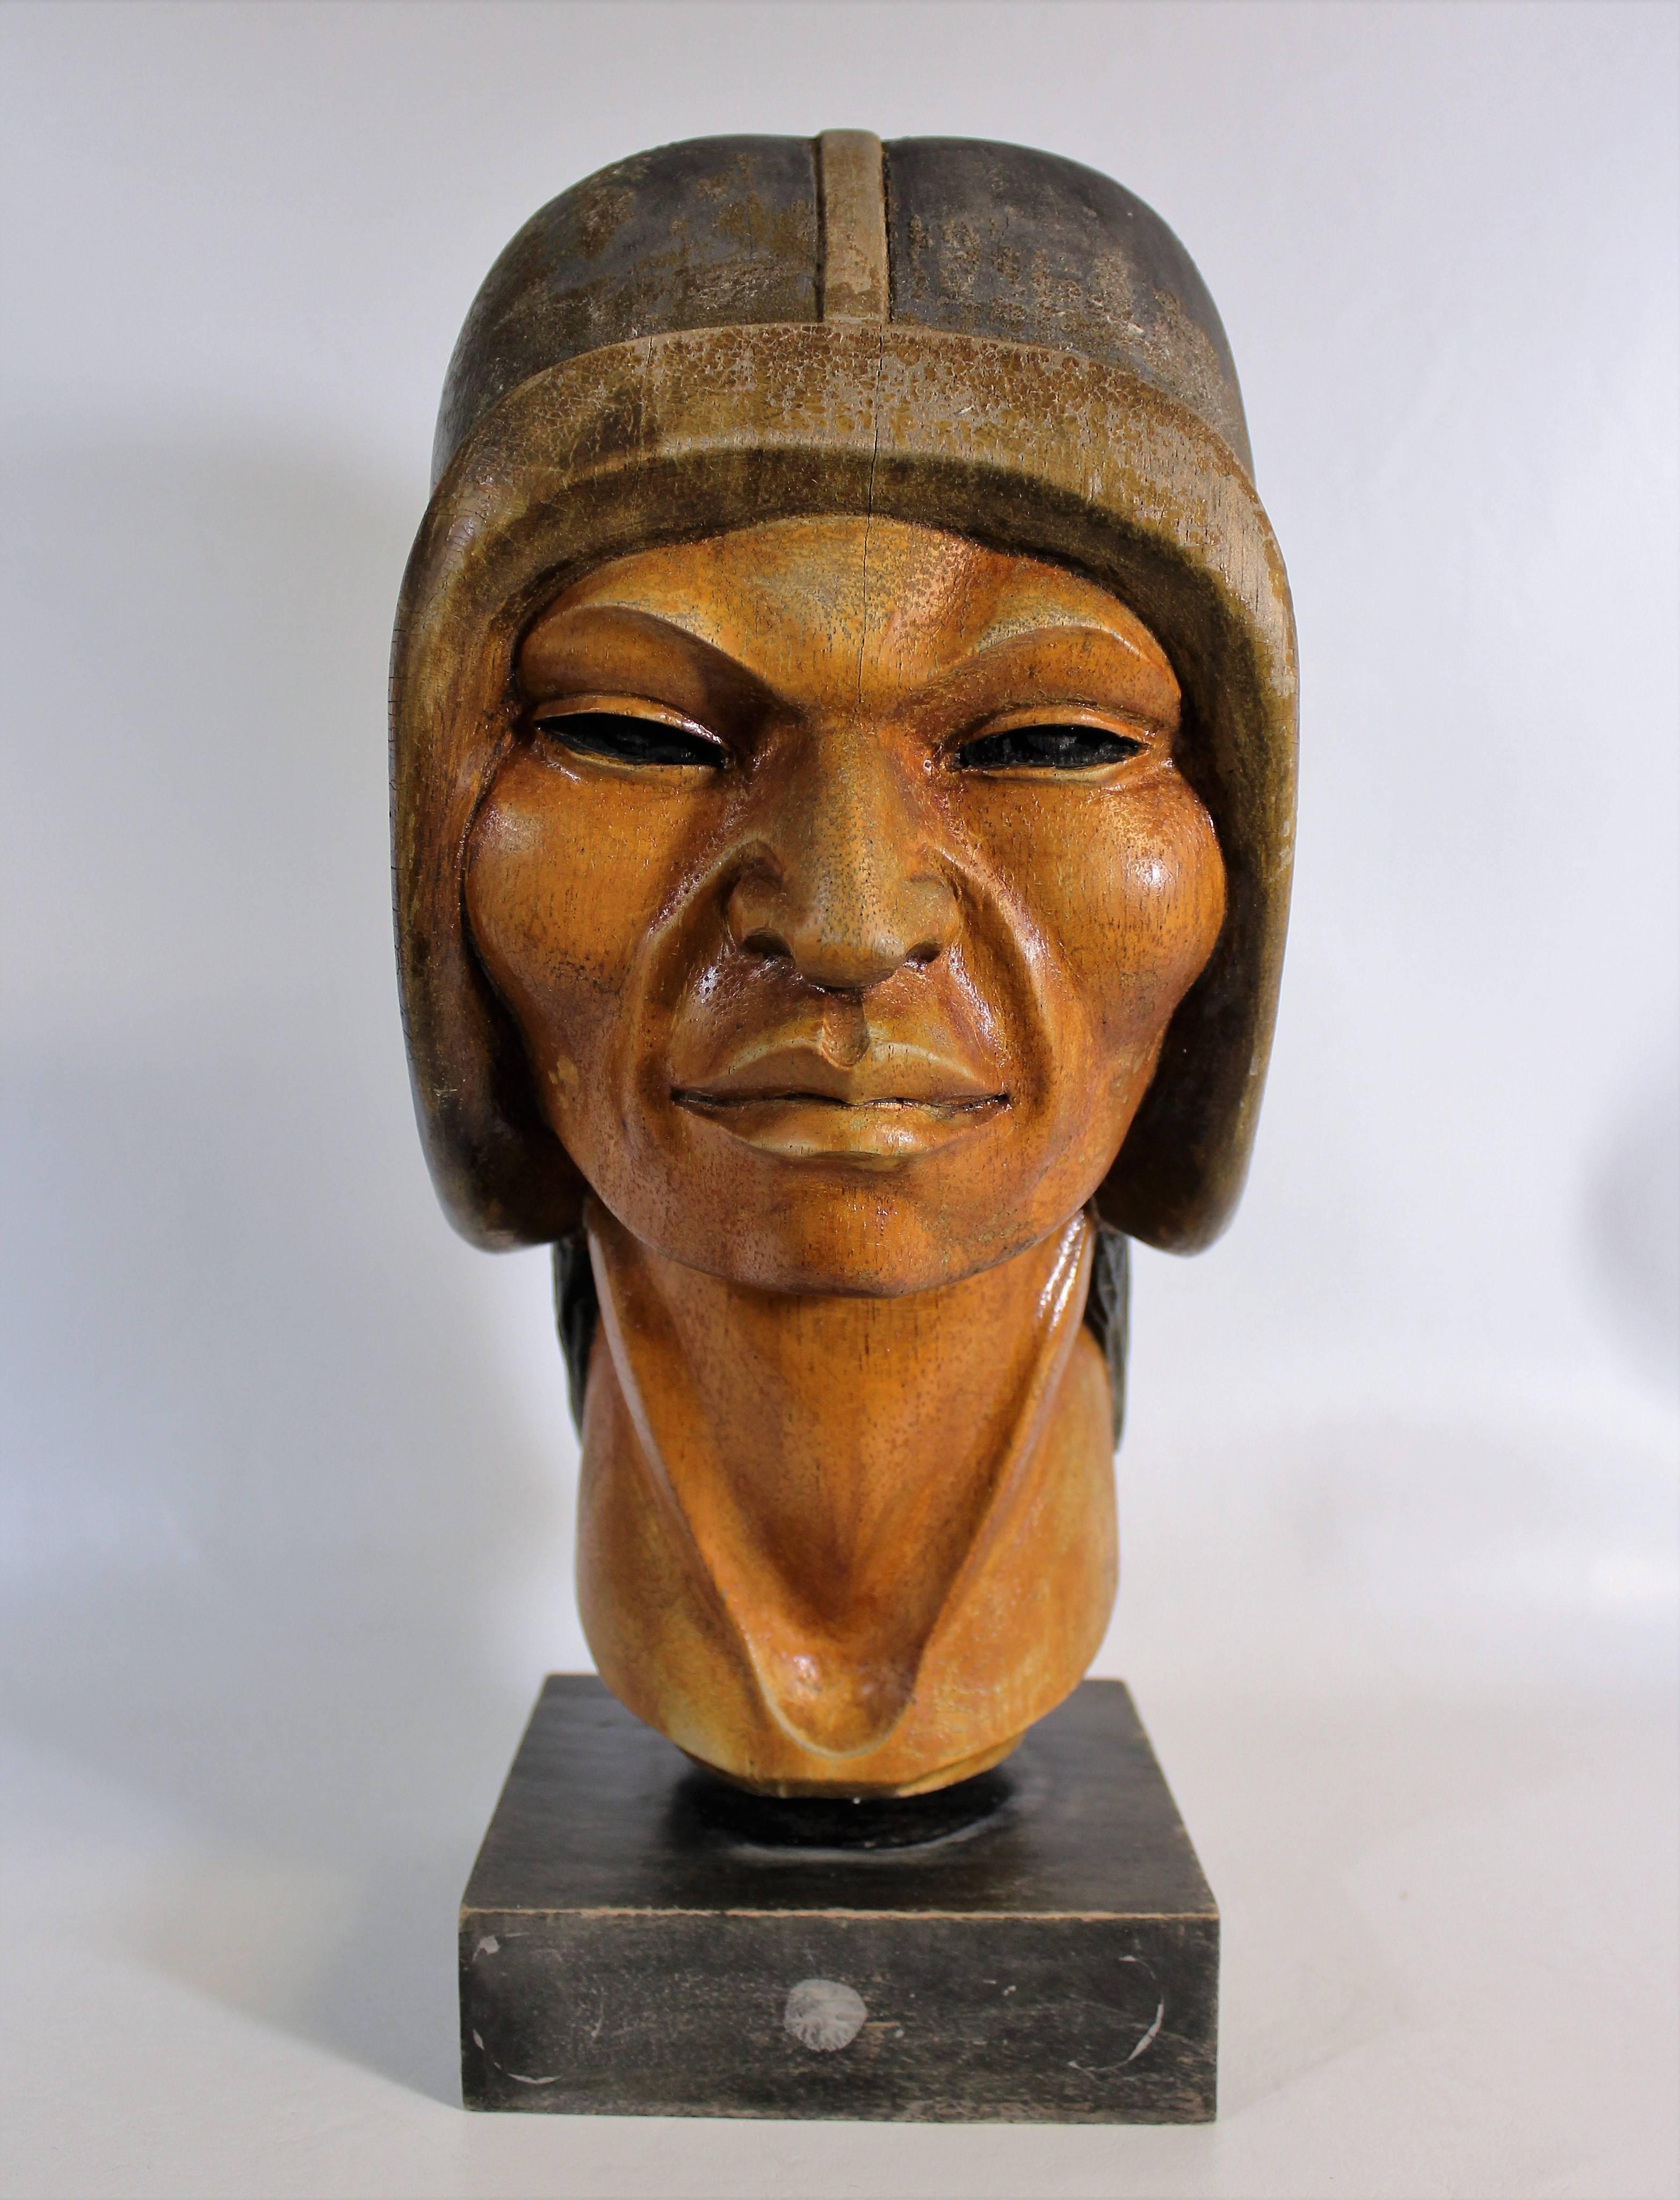 19th century native Yampara carved wood bust/sculpture.